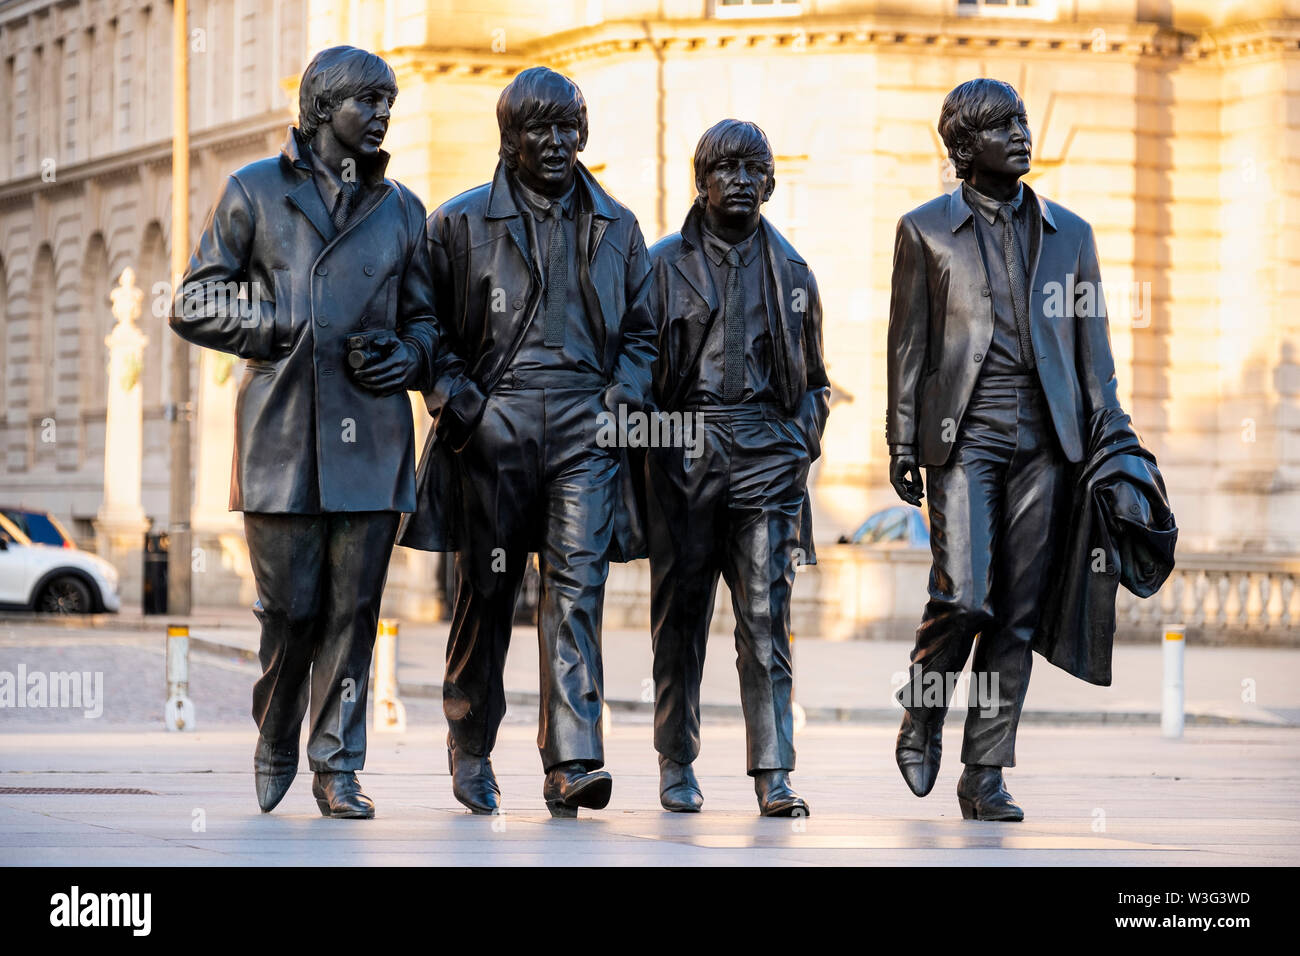 The Beatles Statue in Liverpool (UK), created by sculptor Andrew Edwards and donated to the City of Liverpool in 2008 by the Cavern Club Stock Photo